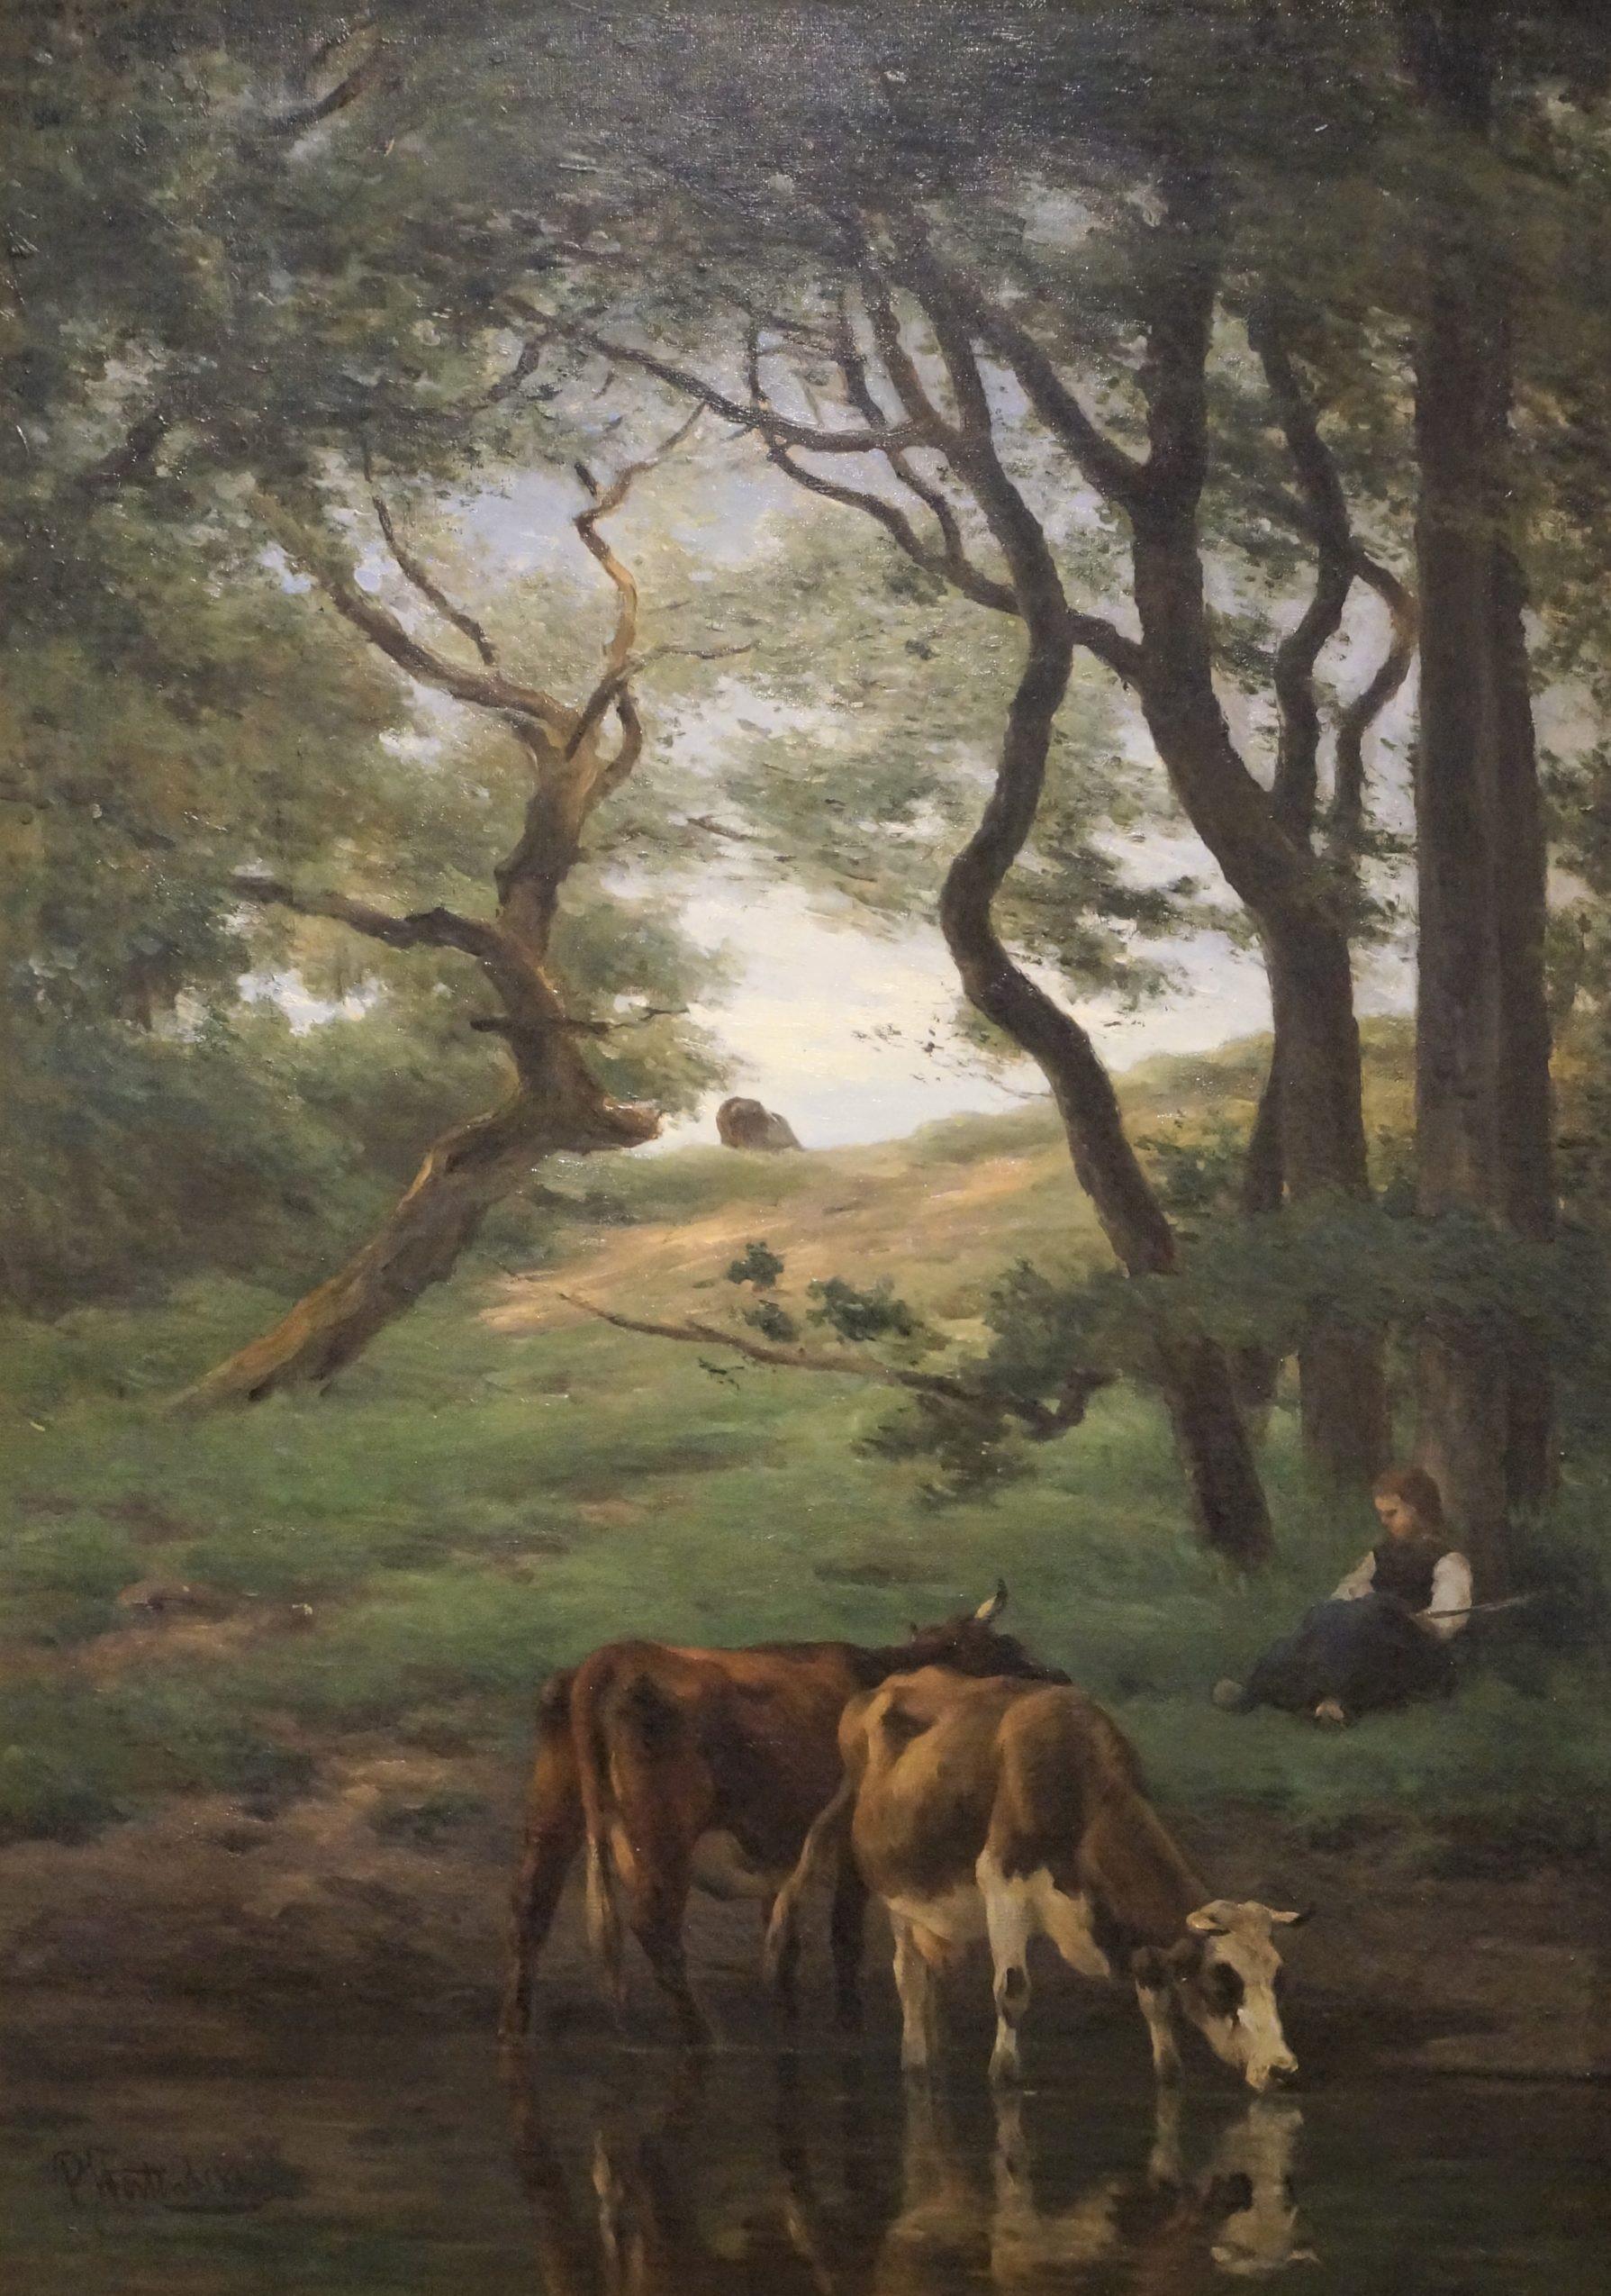 Cows in landscape